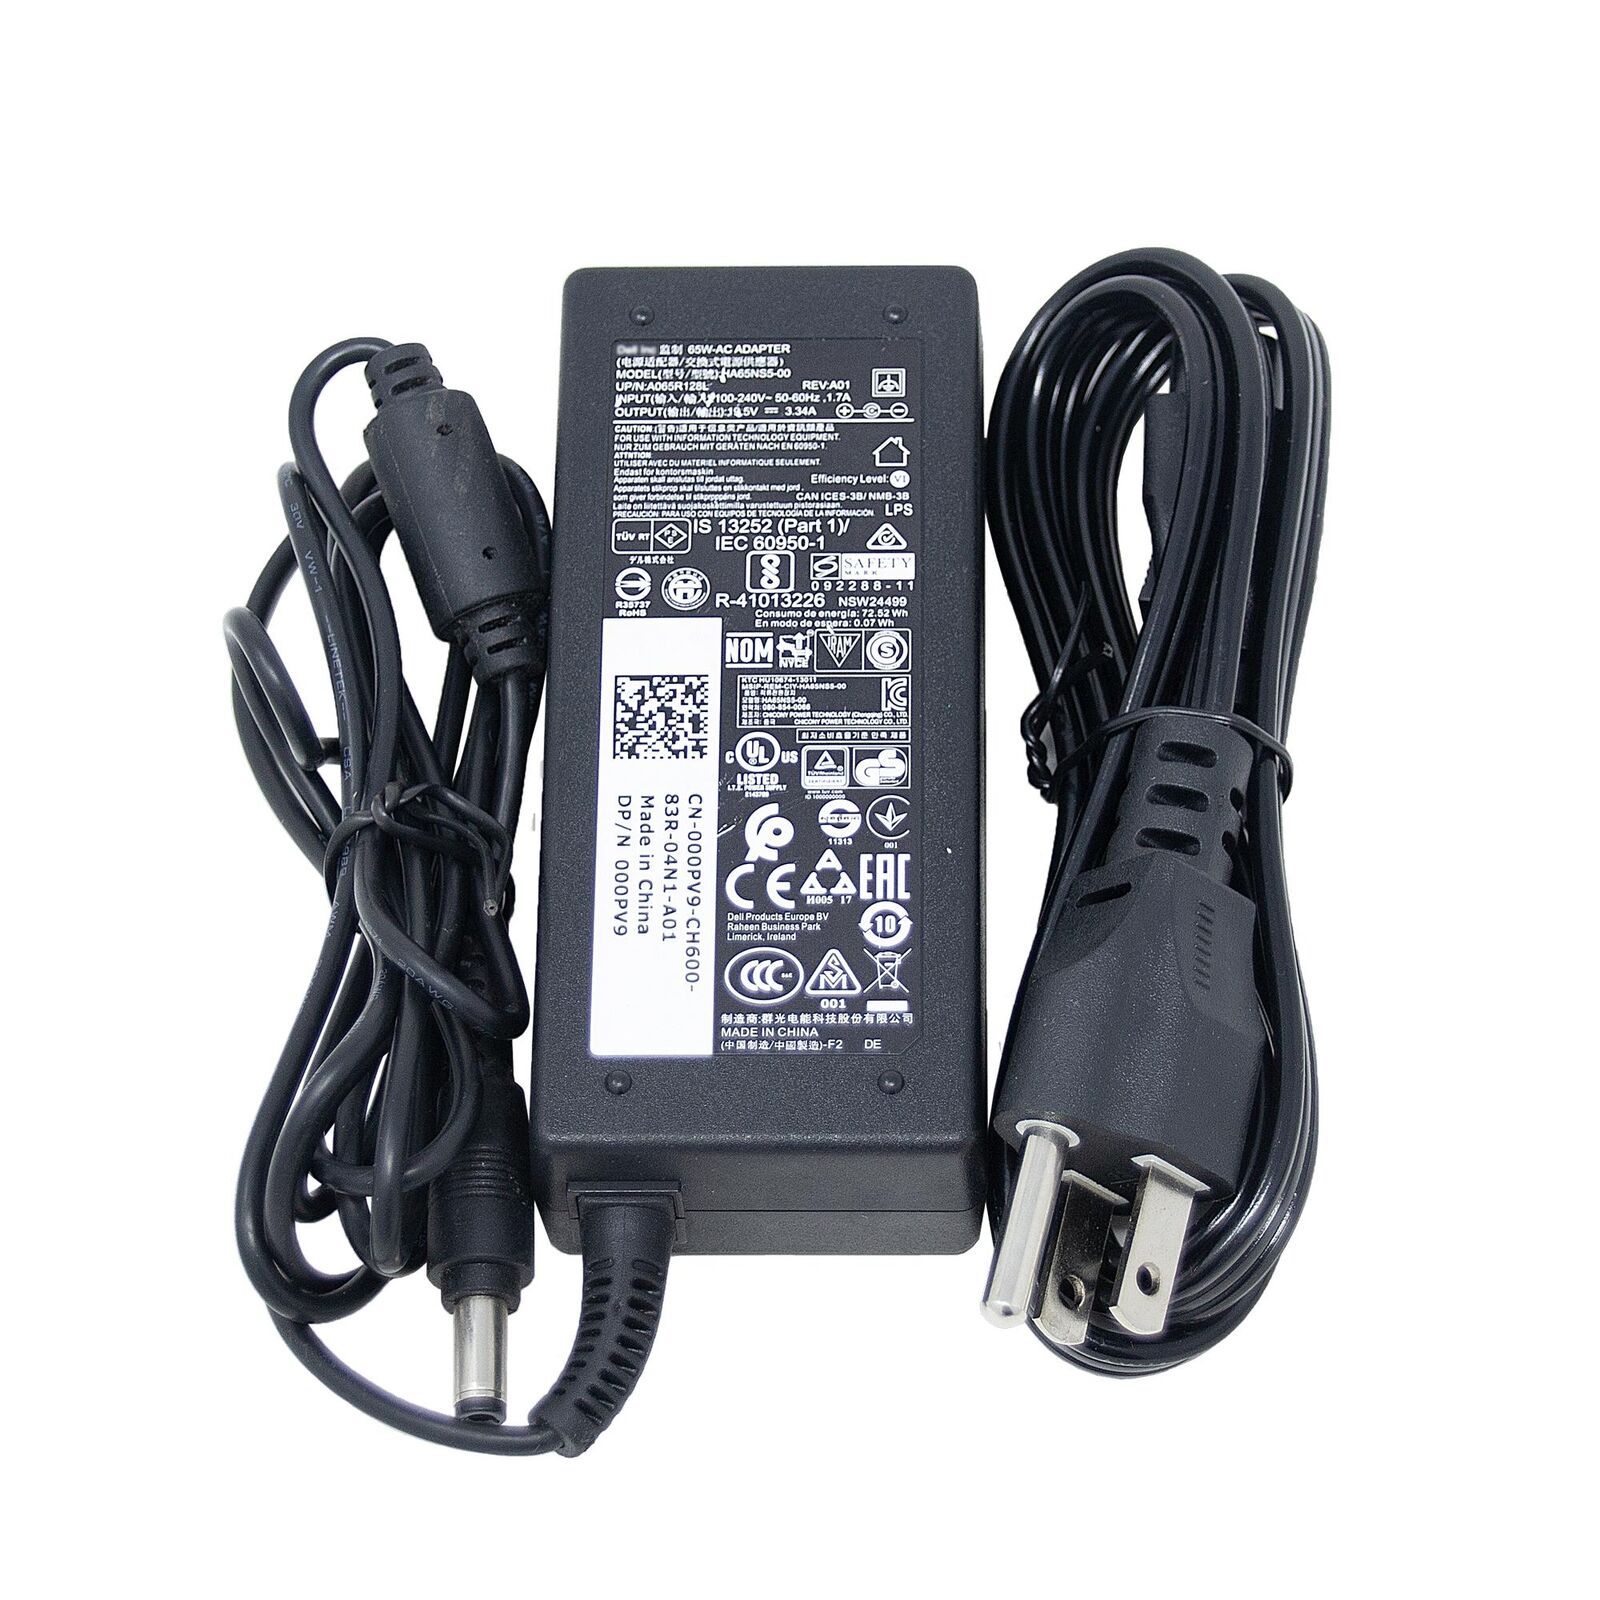 DELL Wyse 5060 N07D 65W Genuine Original AC Power Adapter Charger